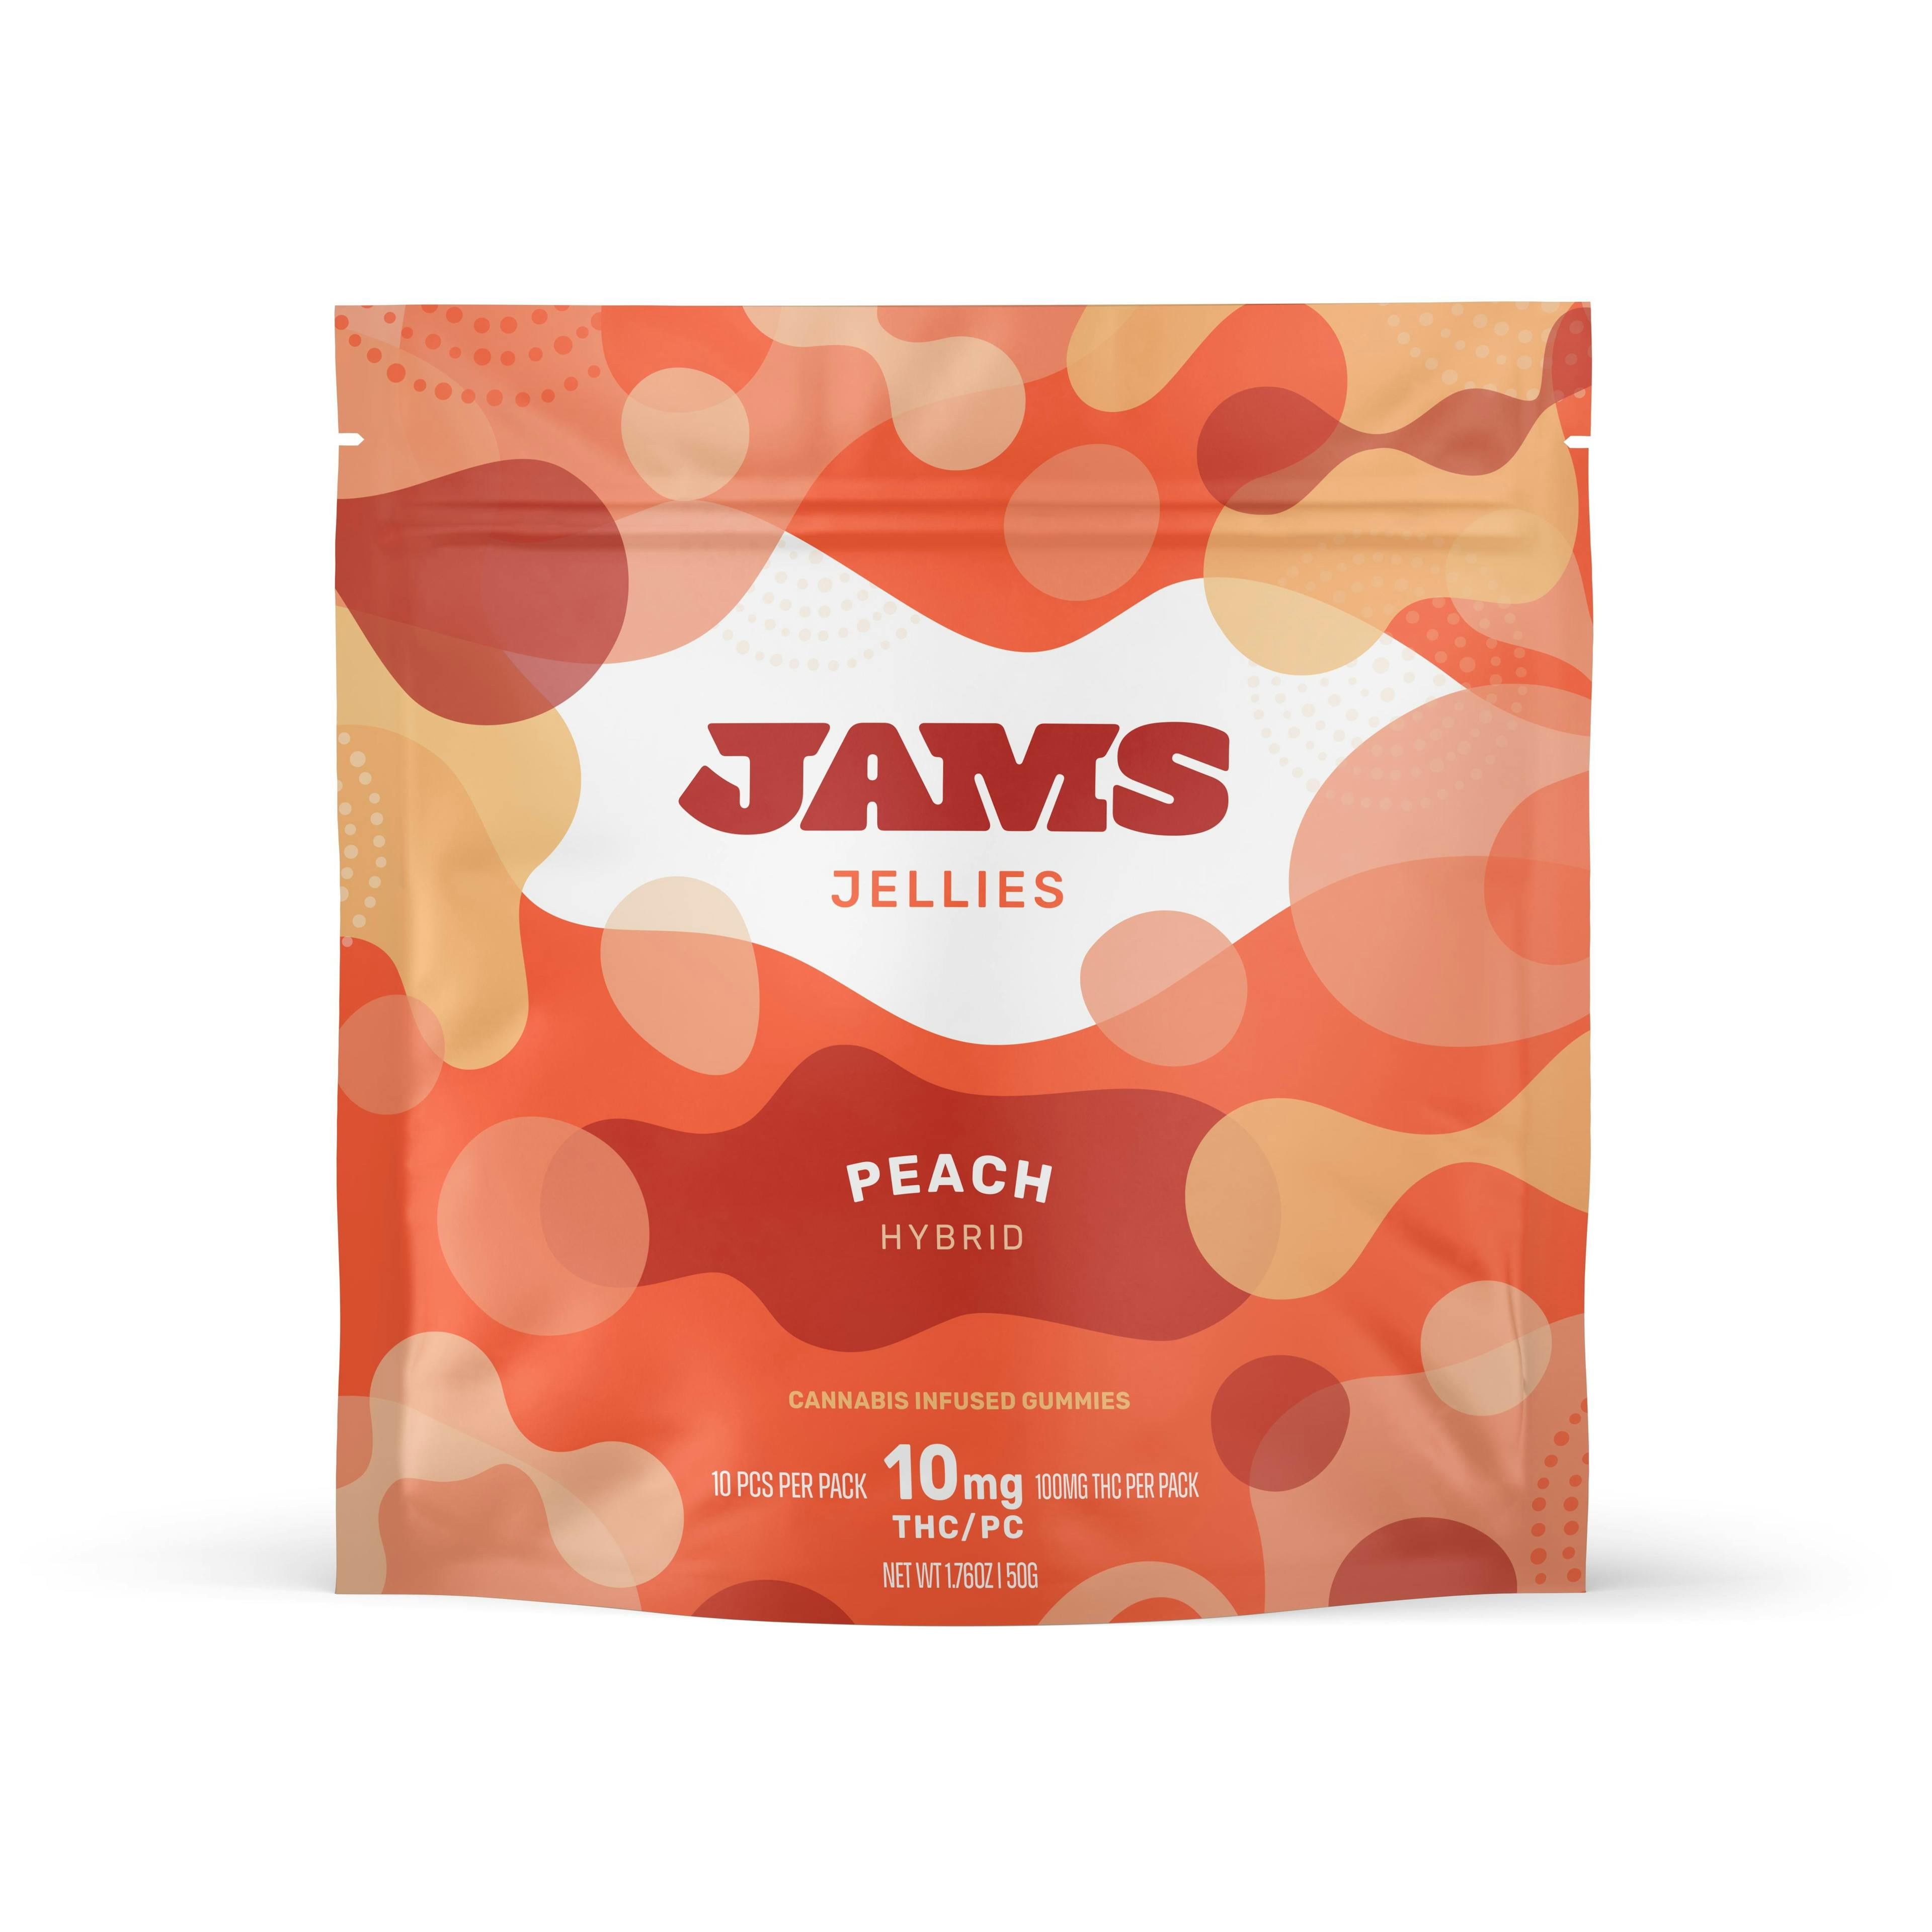 Review: Peach Jellies by JAMS